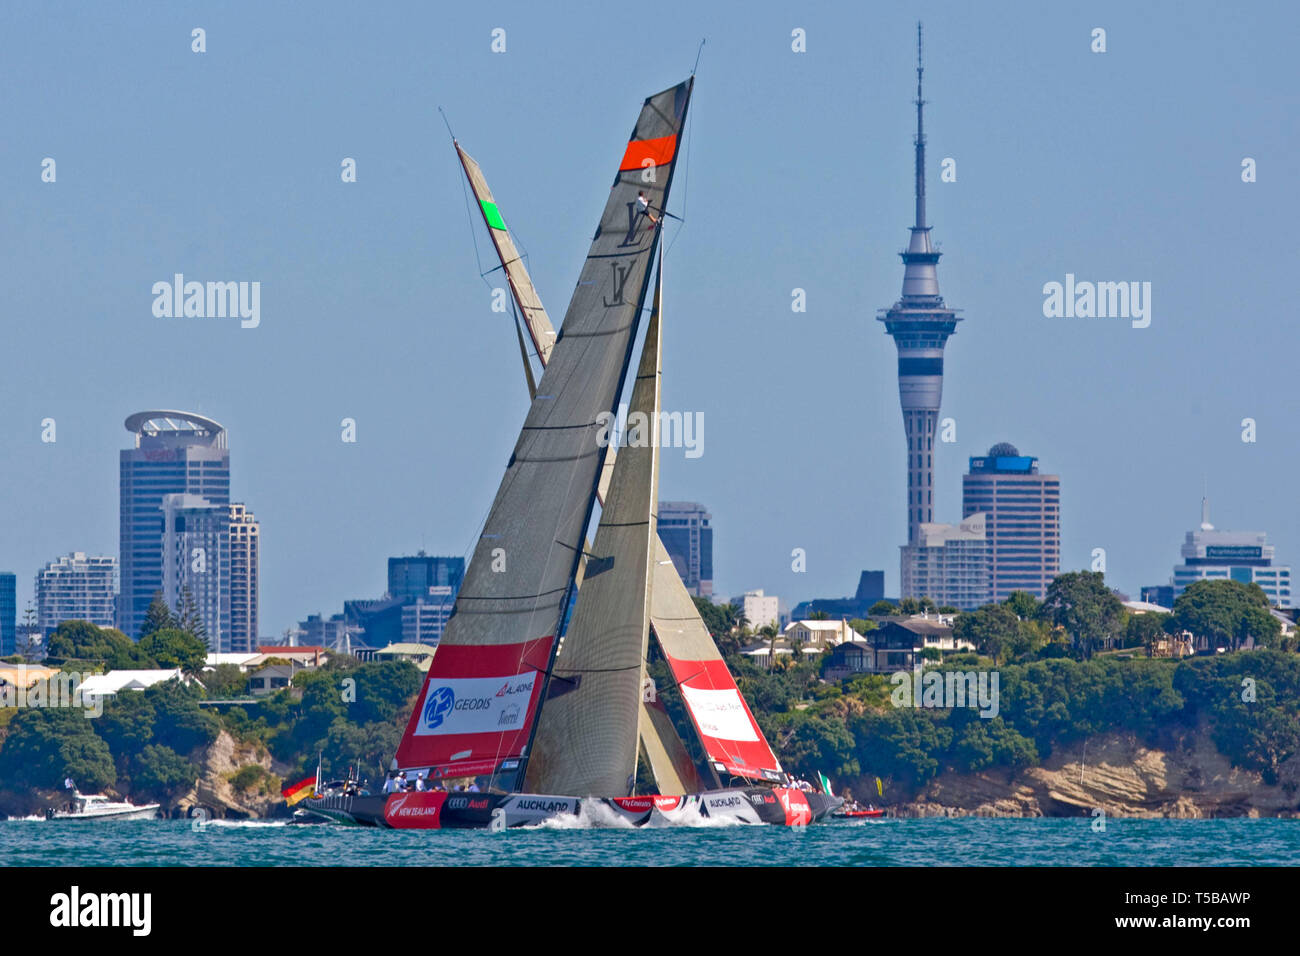 All4one crosses in front of Mascalzone Latino Audi Team during round robin 1 of the Louis Vuitton Trophy, Auckland, New Zealand, Stock Photo